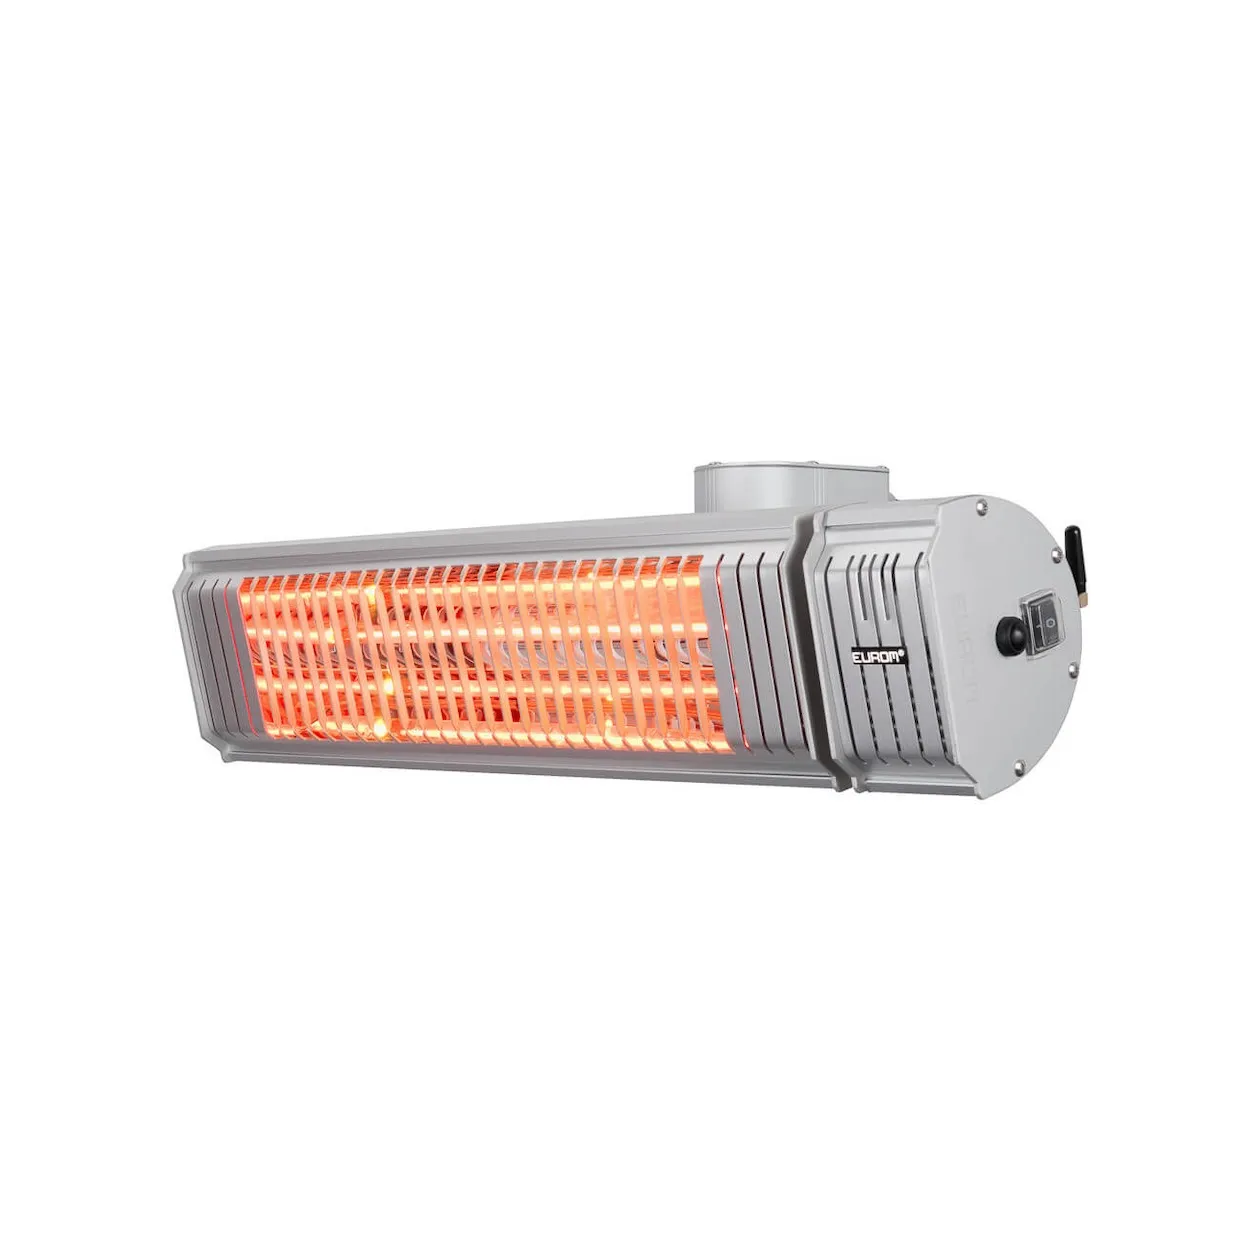 Eurom Golden 2000 Amber Rotary Patioheater